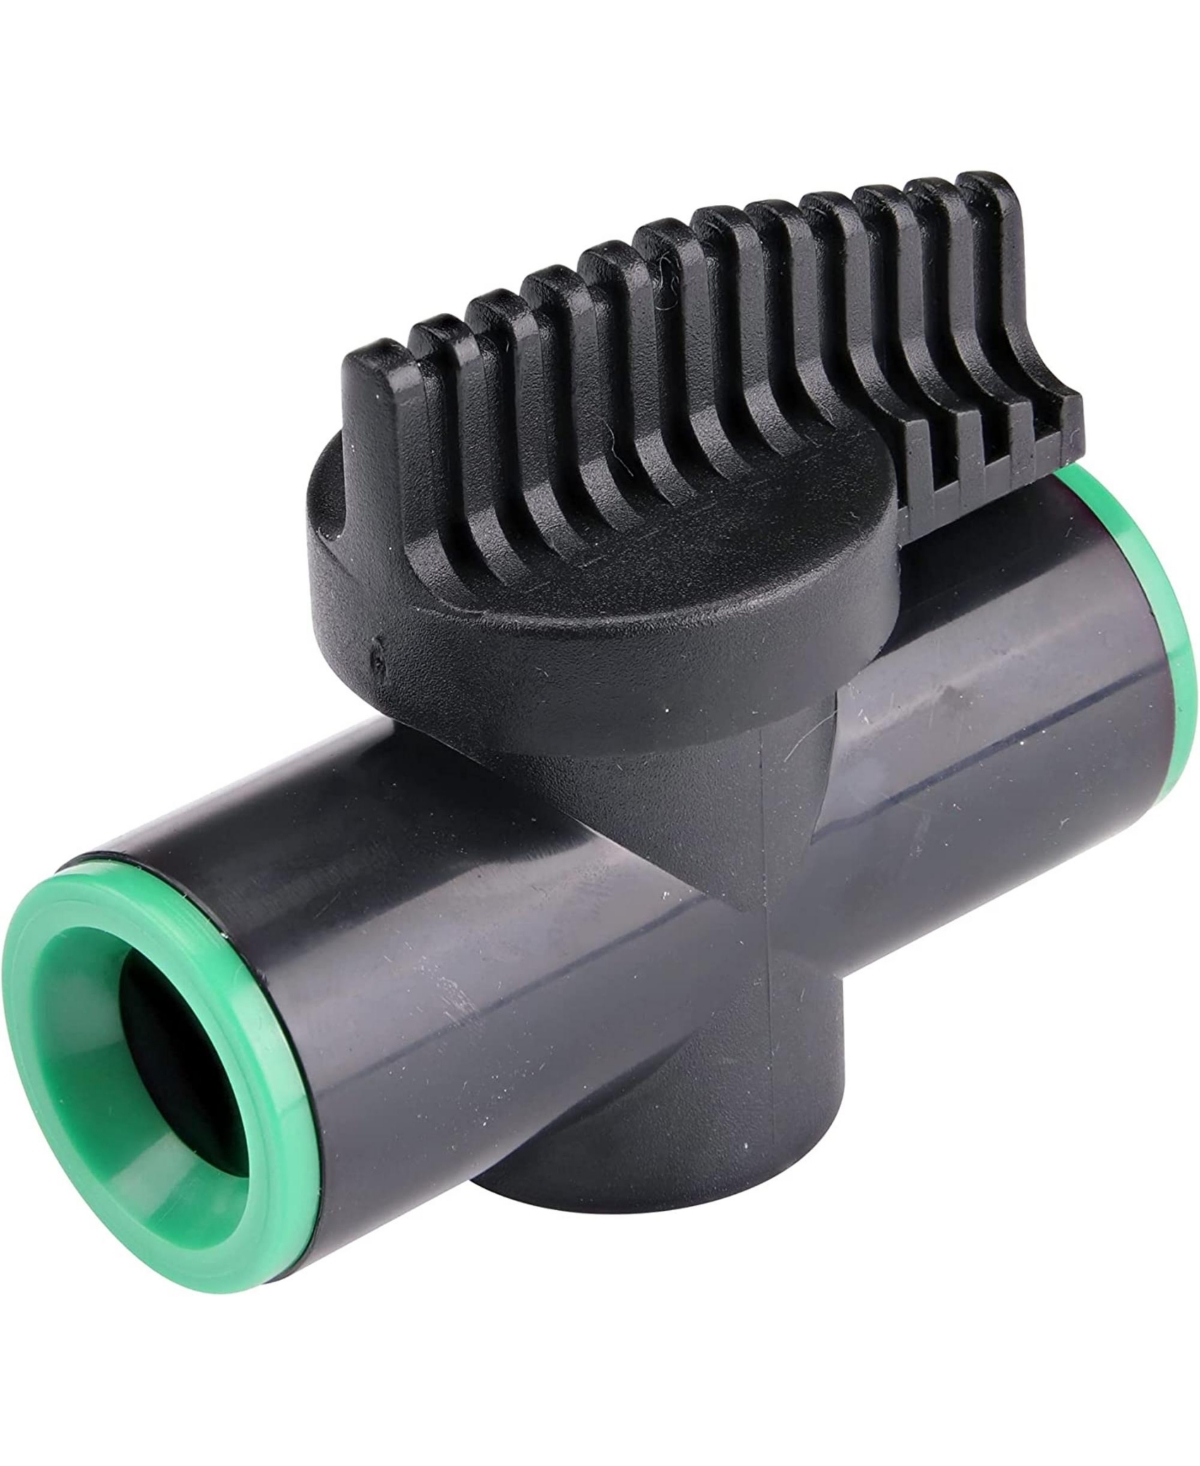 Compression 1/2 In. Drip Irrigation Valve Connector (1 per pack) - Multi